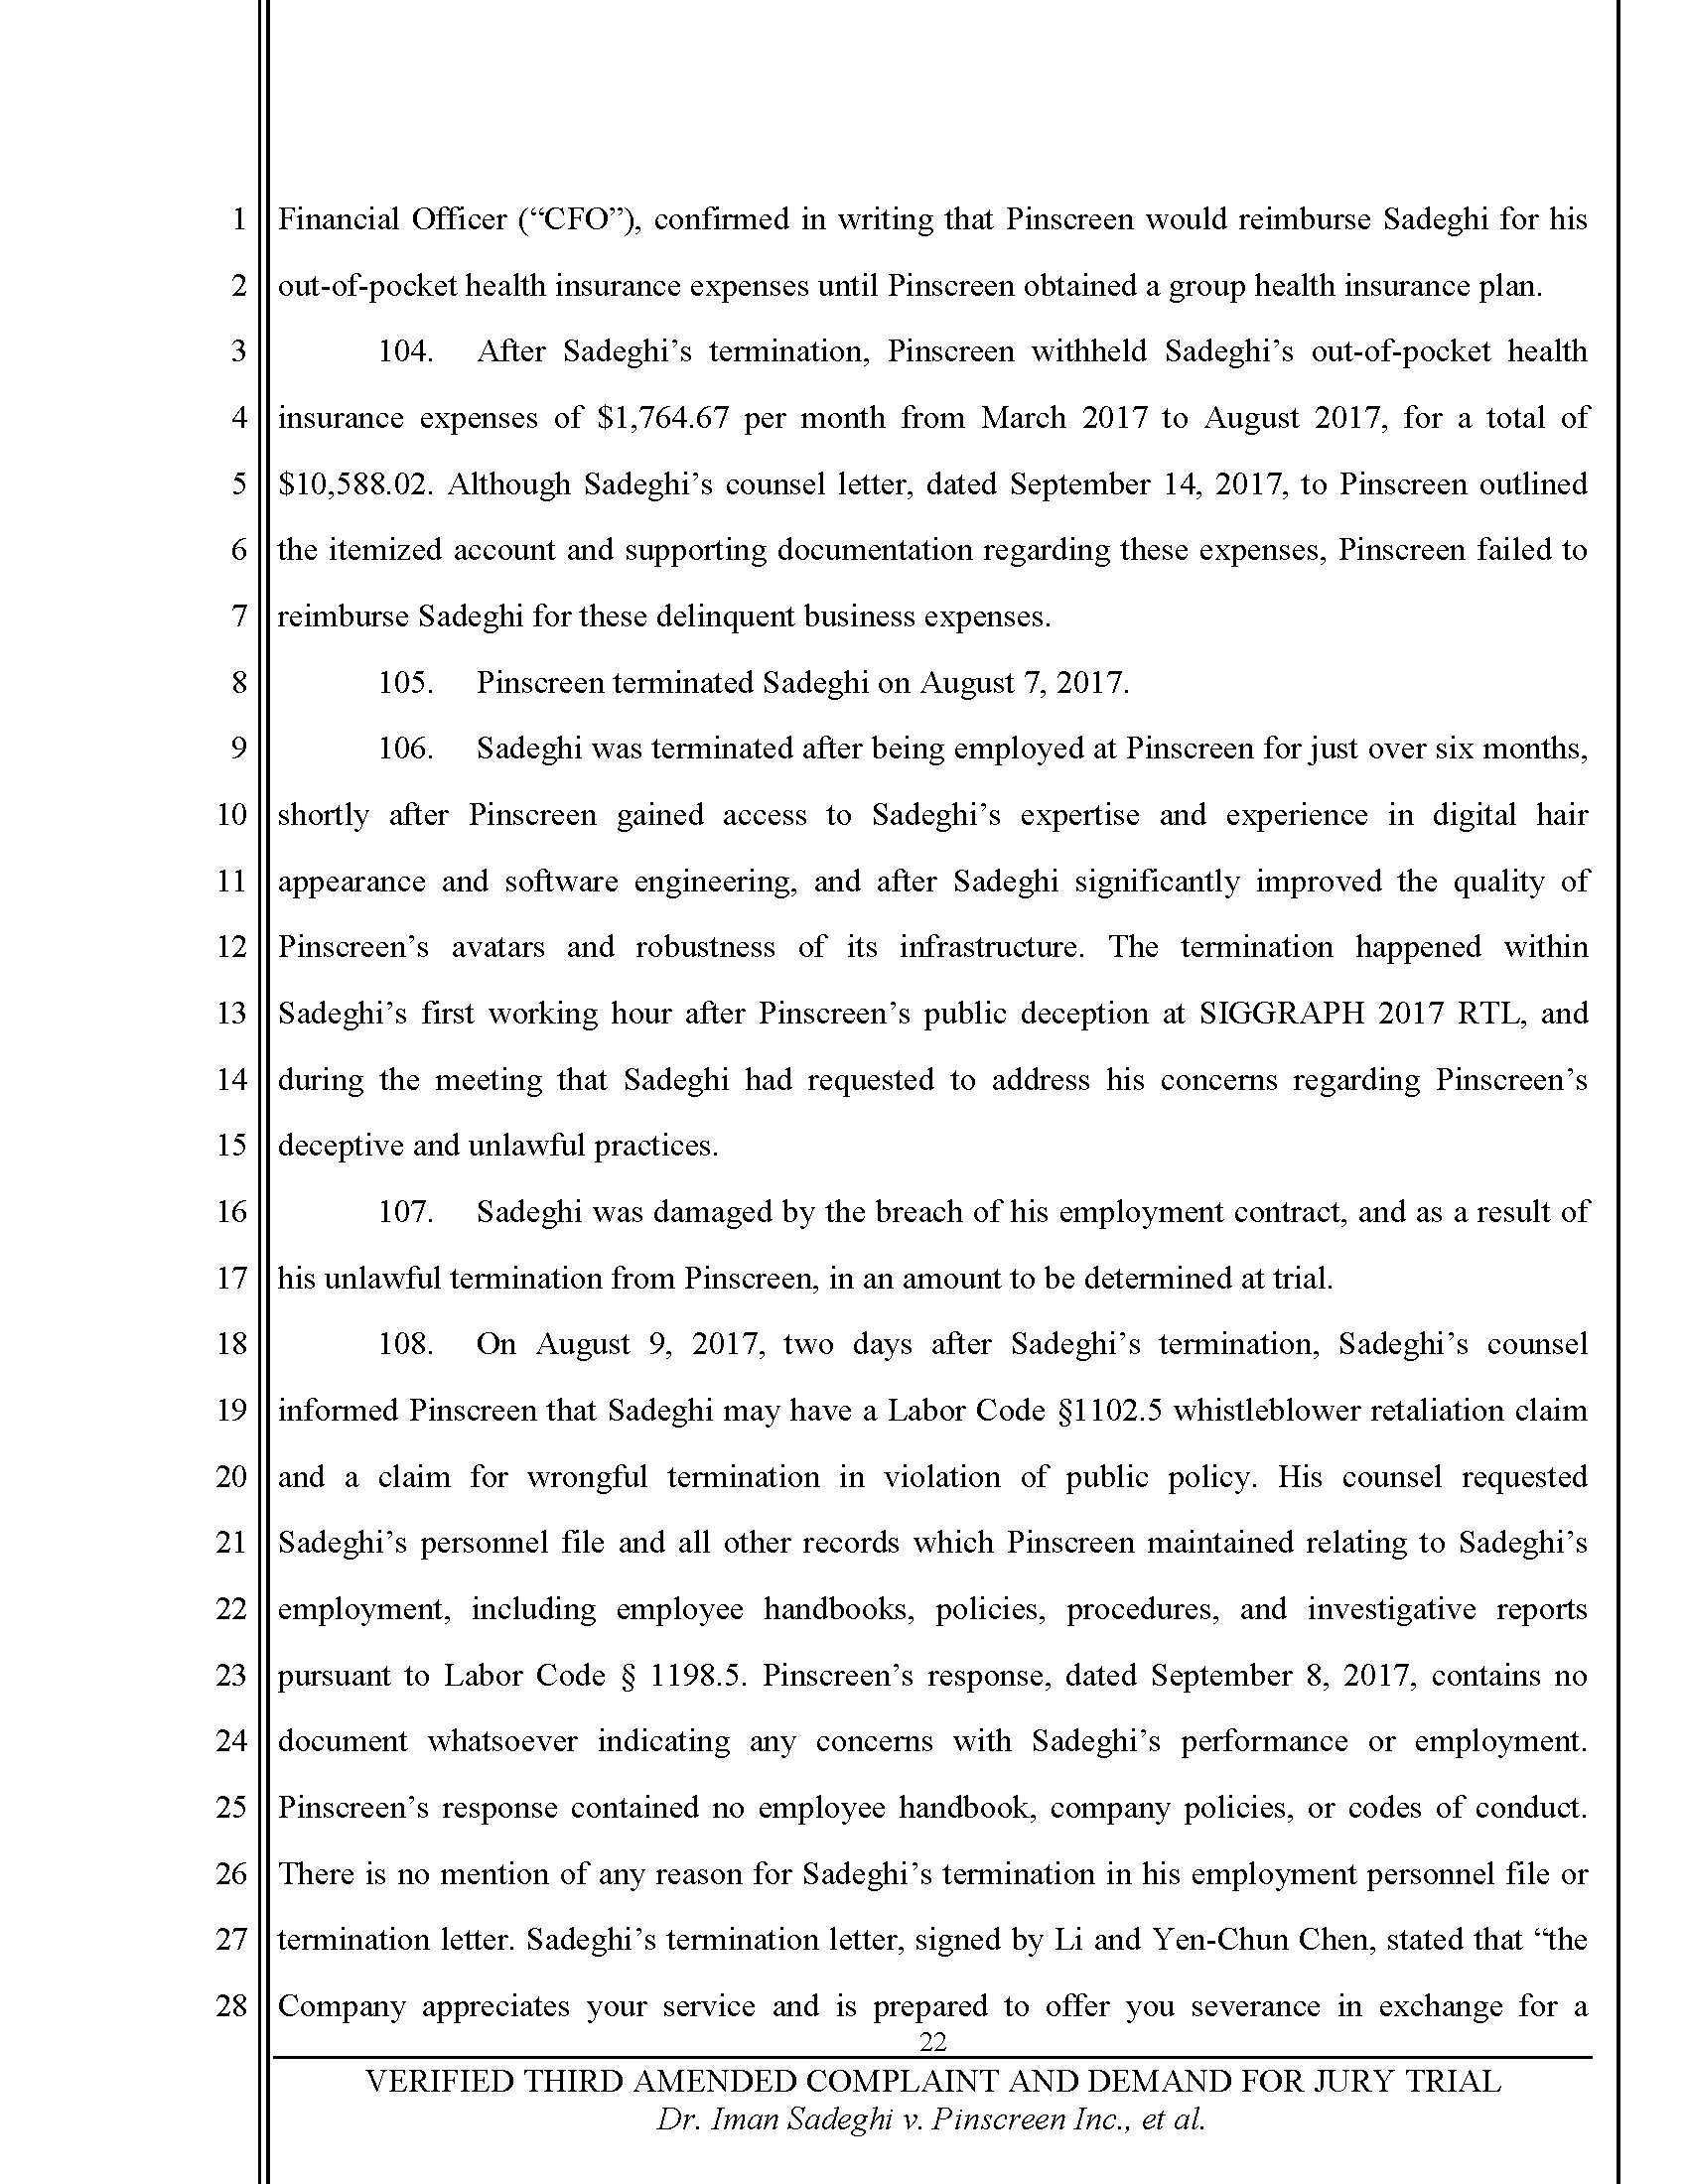 Third Amended Complaint (TAC) Page 23